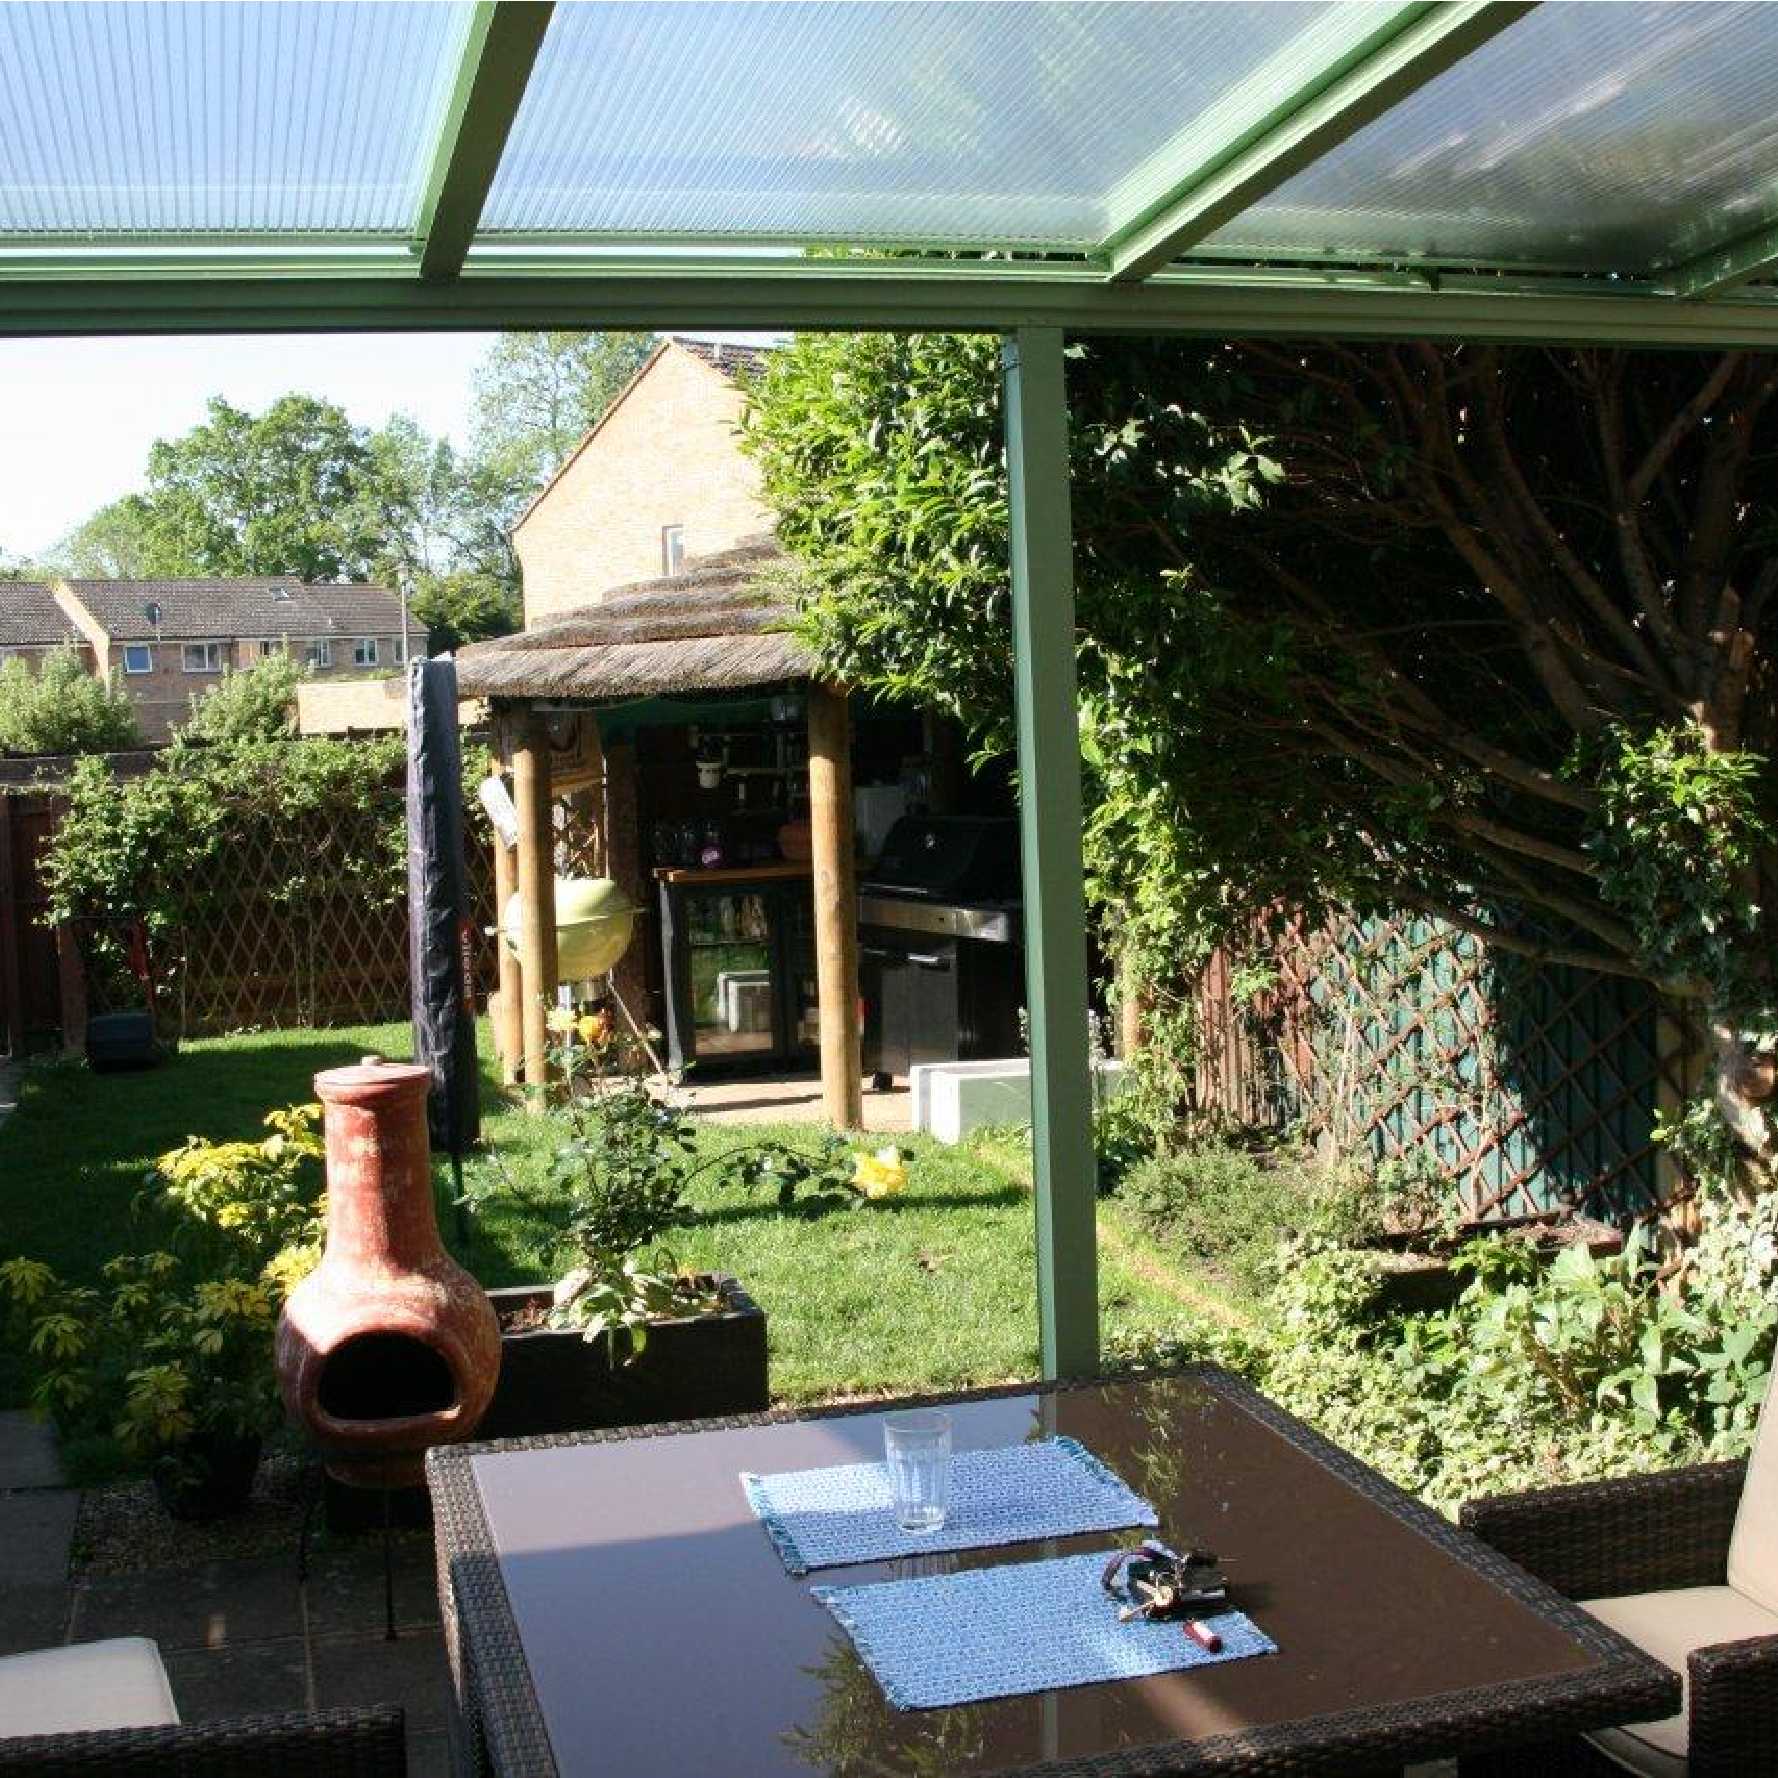 Affordable Omega Smart Lean-To Canopy, White with 16mm Polycarbonate Glazing - 2.1m (W) x 2.0m (P), (2) Supporting Posts